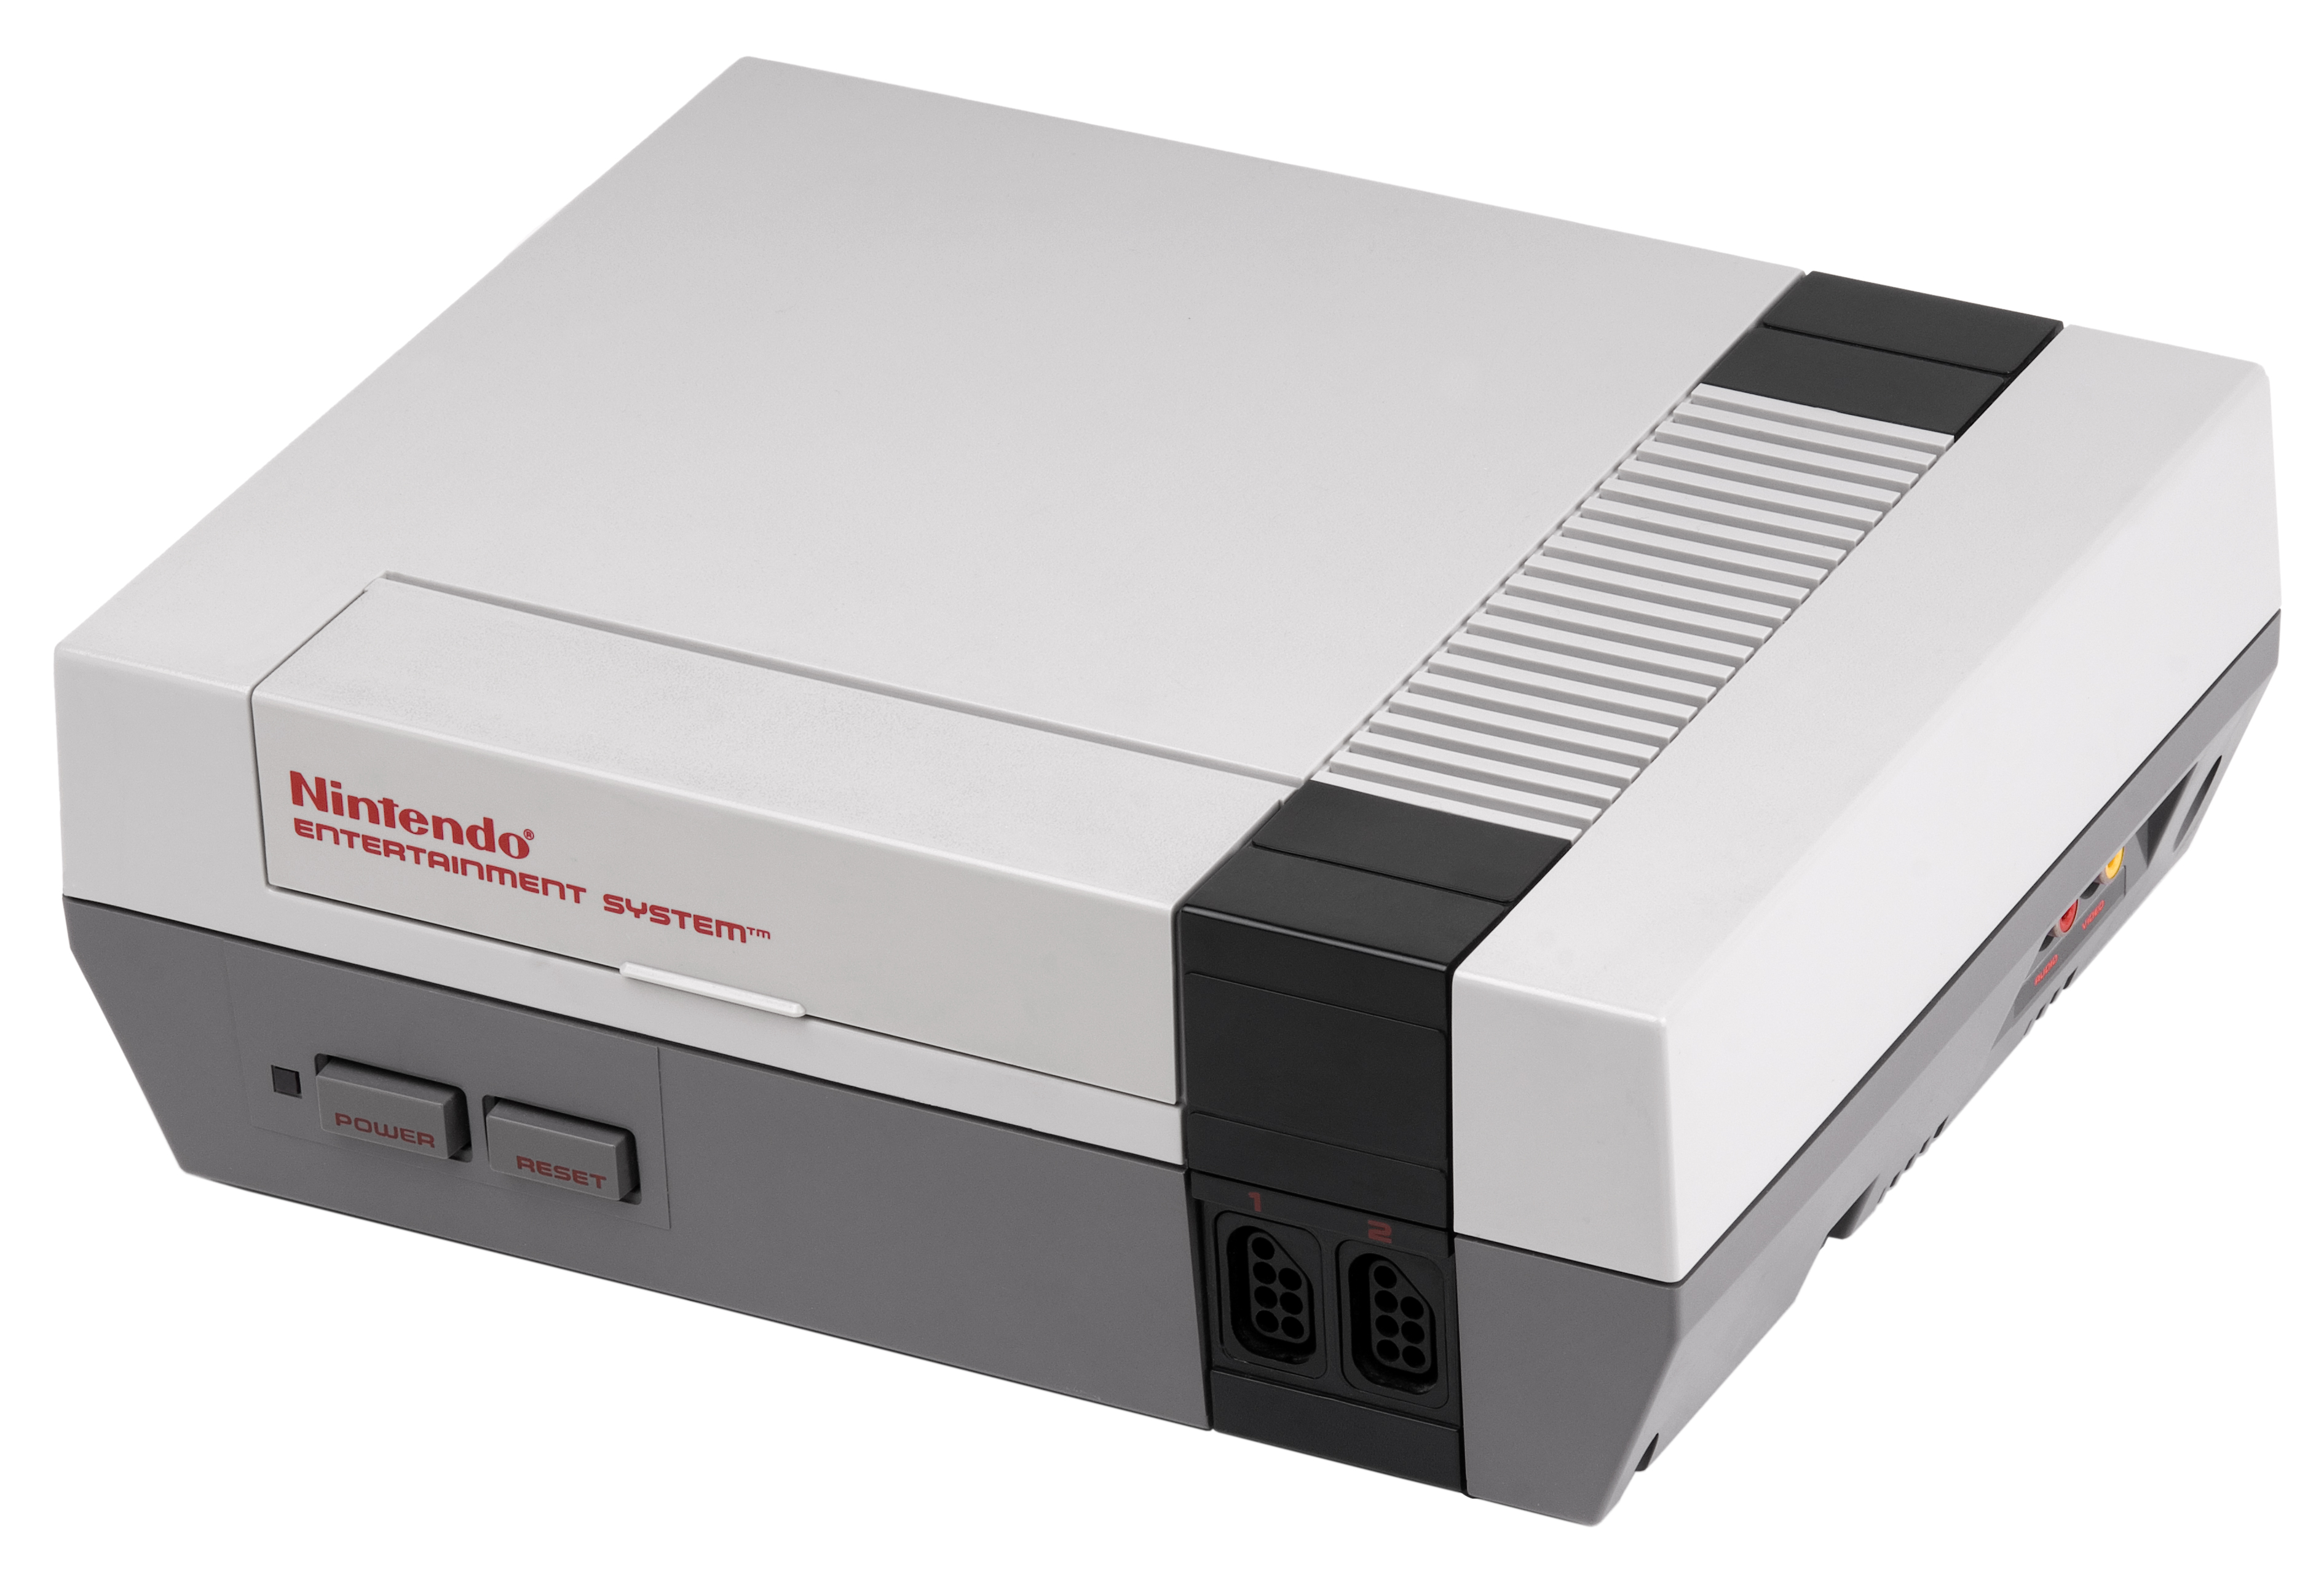 Images of Nintendo Entertainment System | 3780x2560